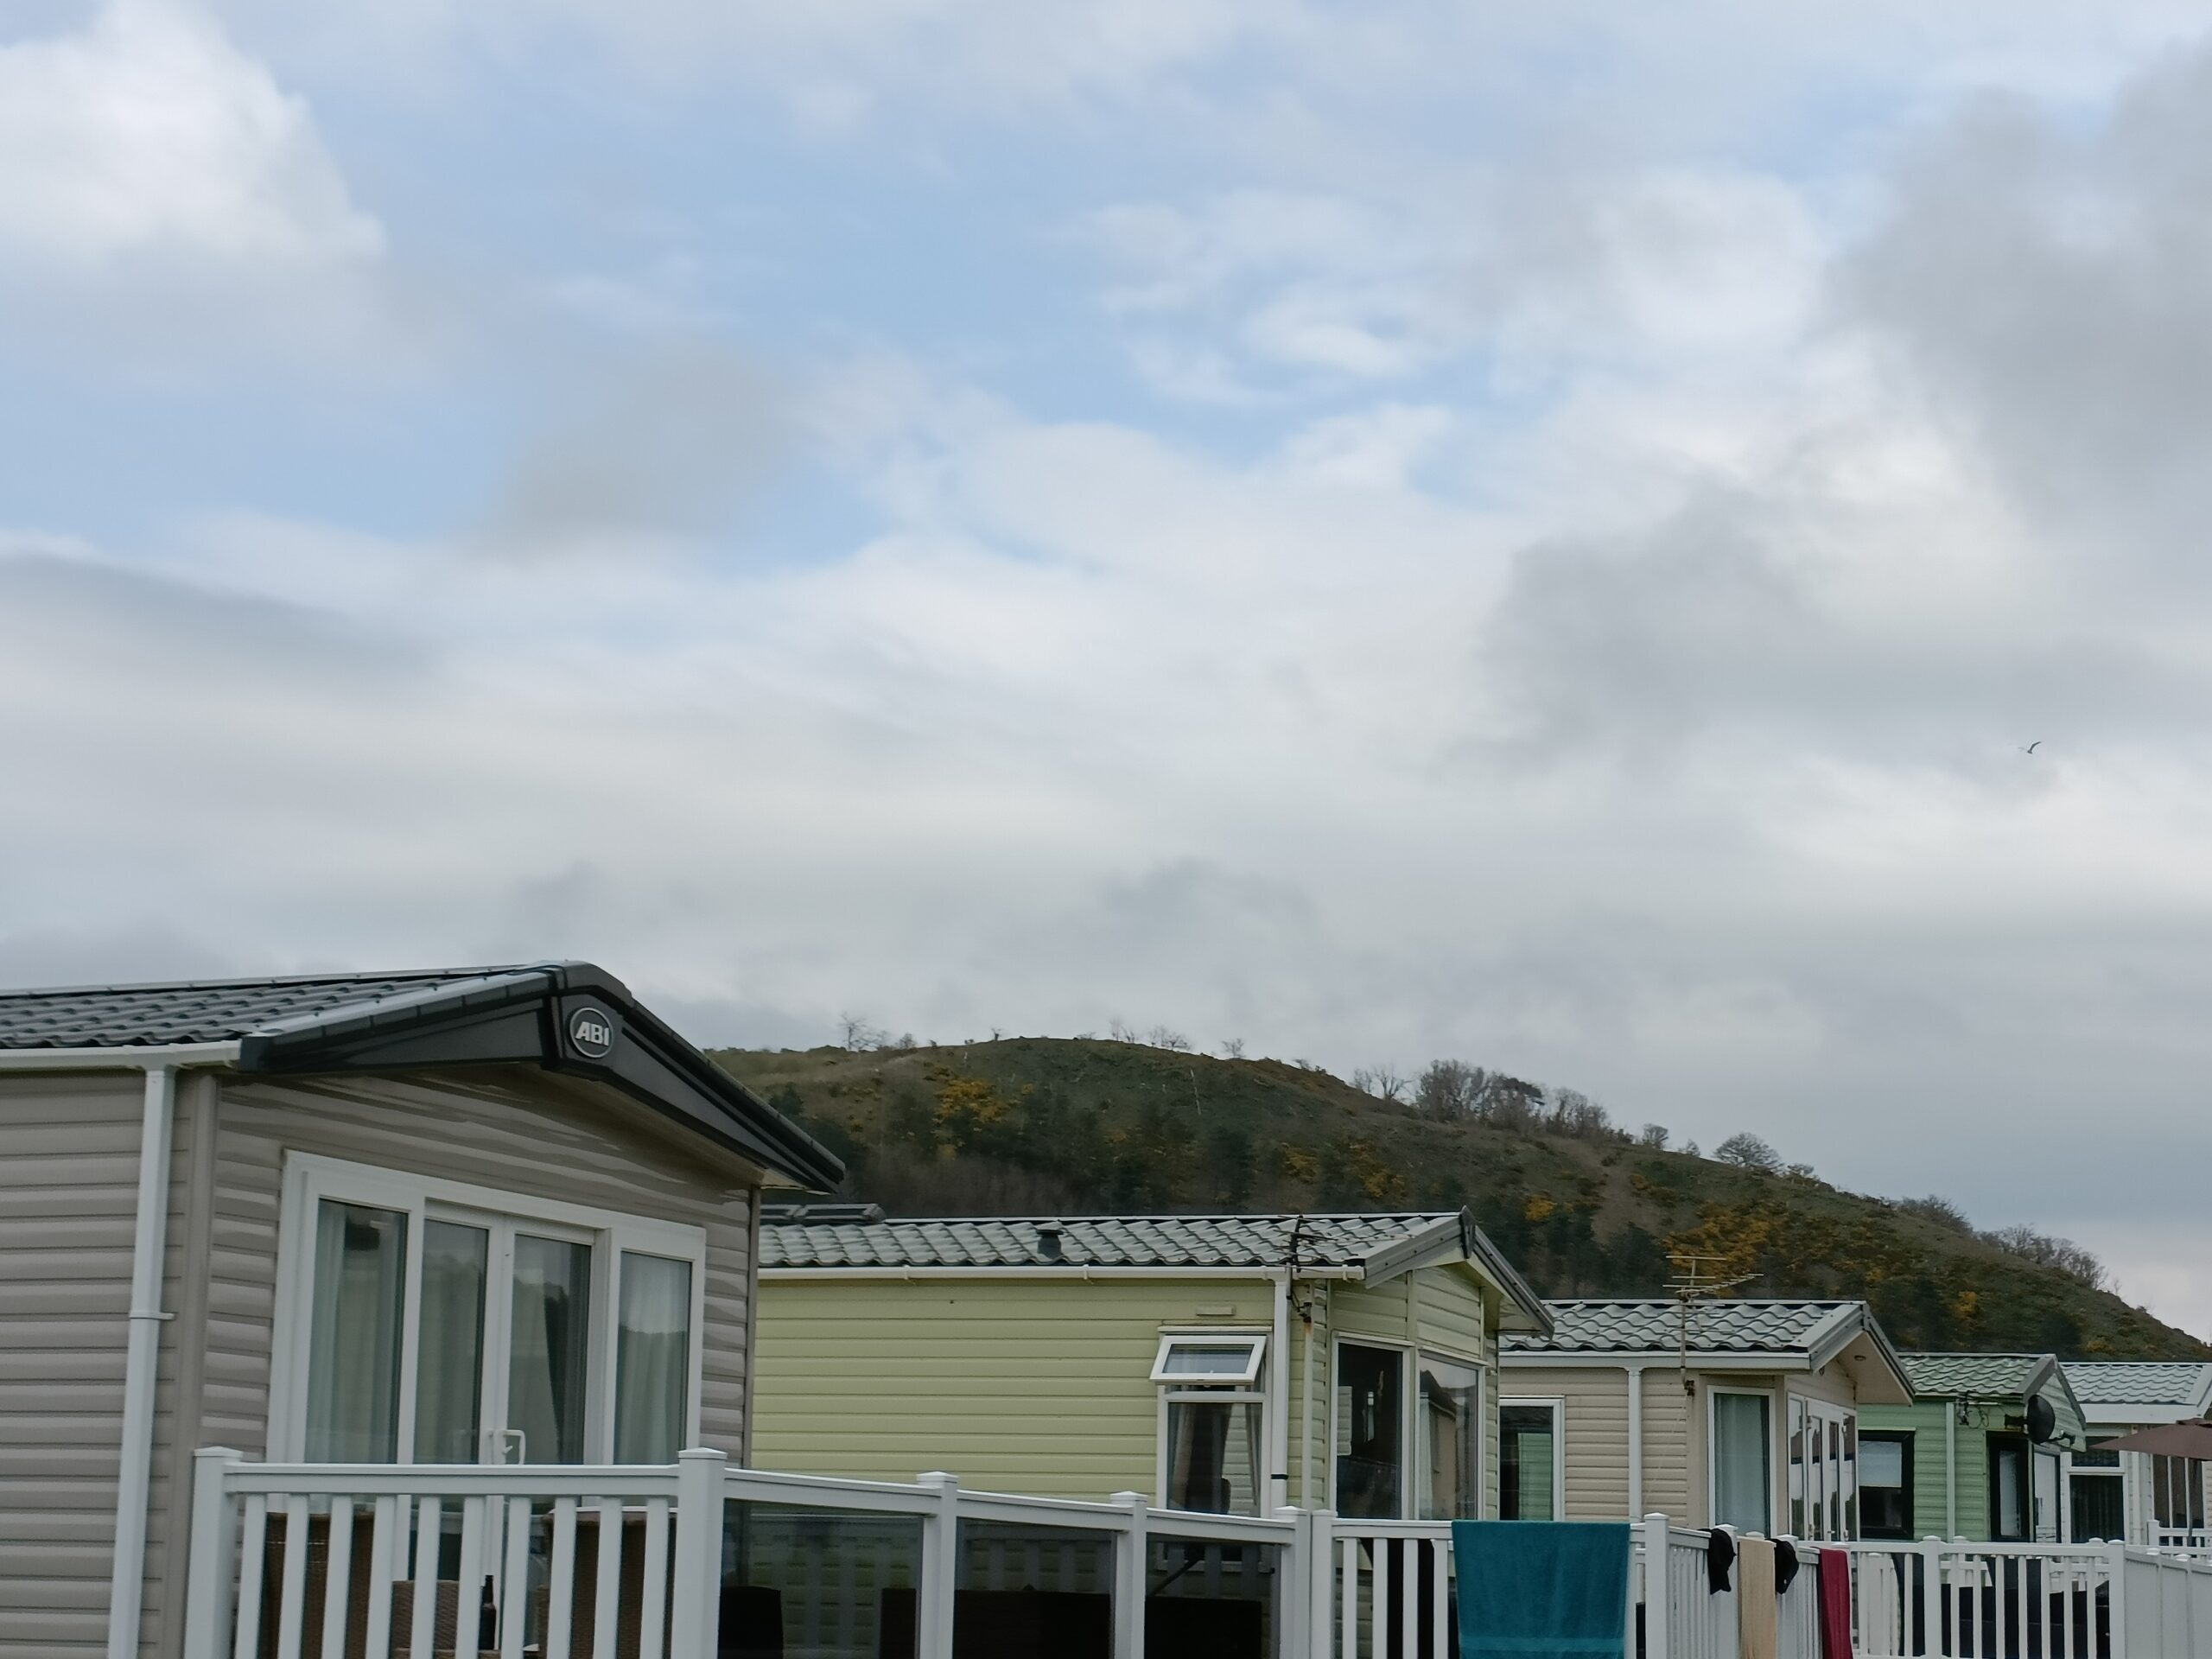 Planning to extend Gwynedd caravan site described as ‘an important provider for tourism’ given green-light